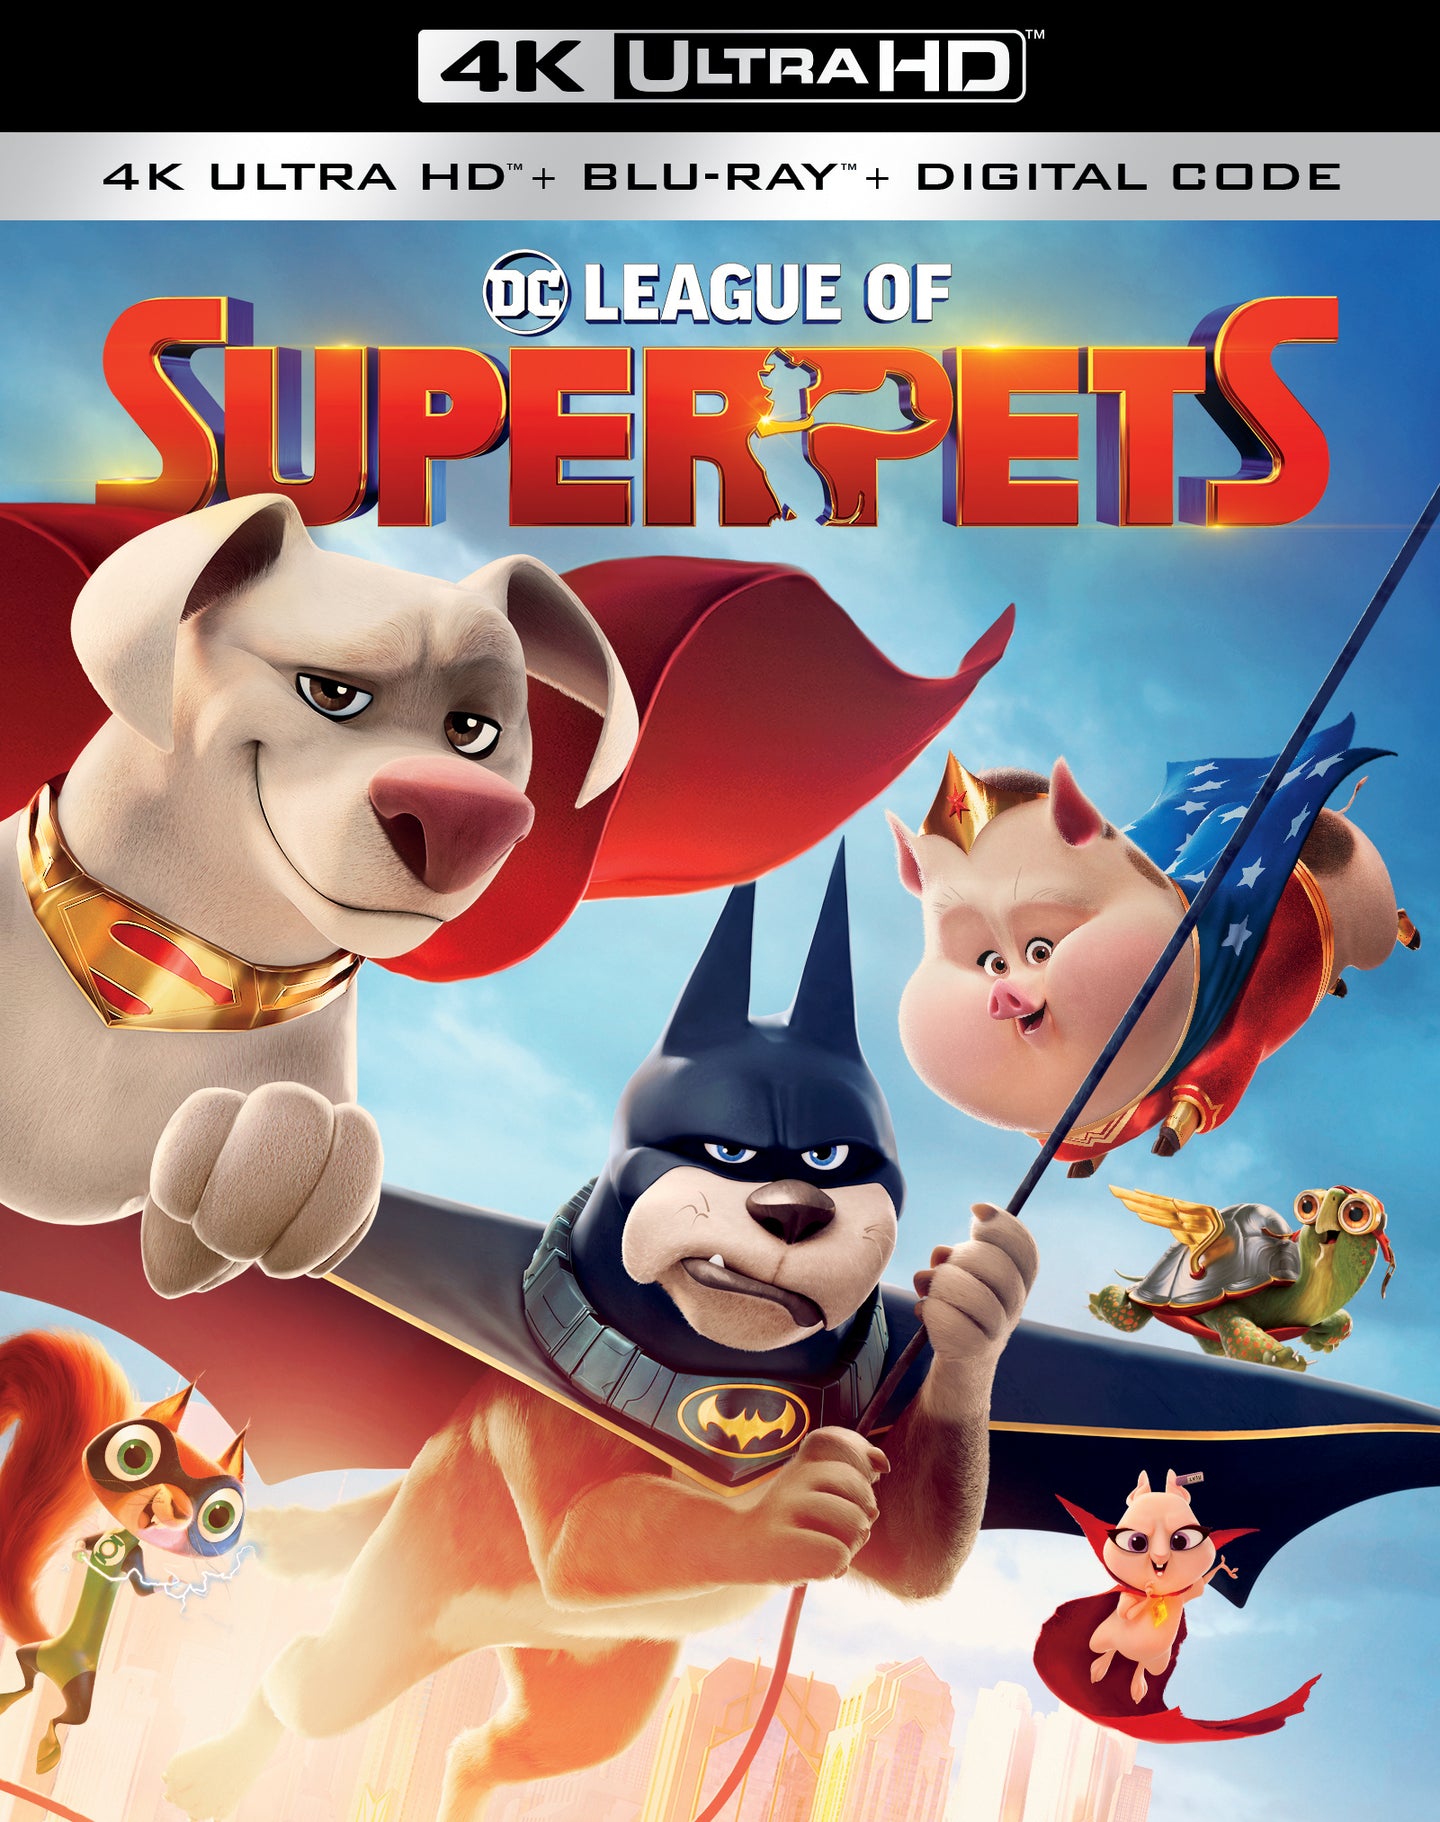 DC League of Super-Pets (2022) Vudu or Movies Anywhere 4K code